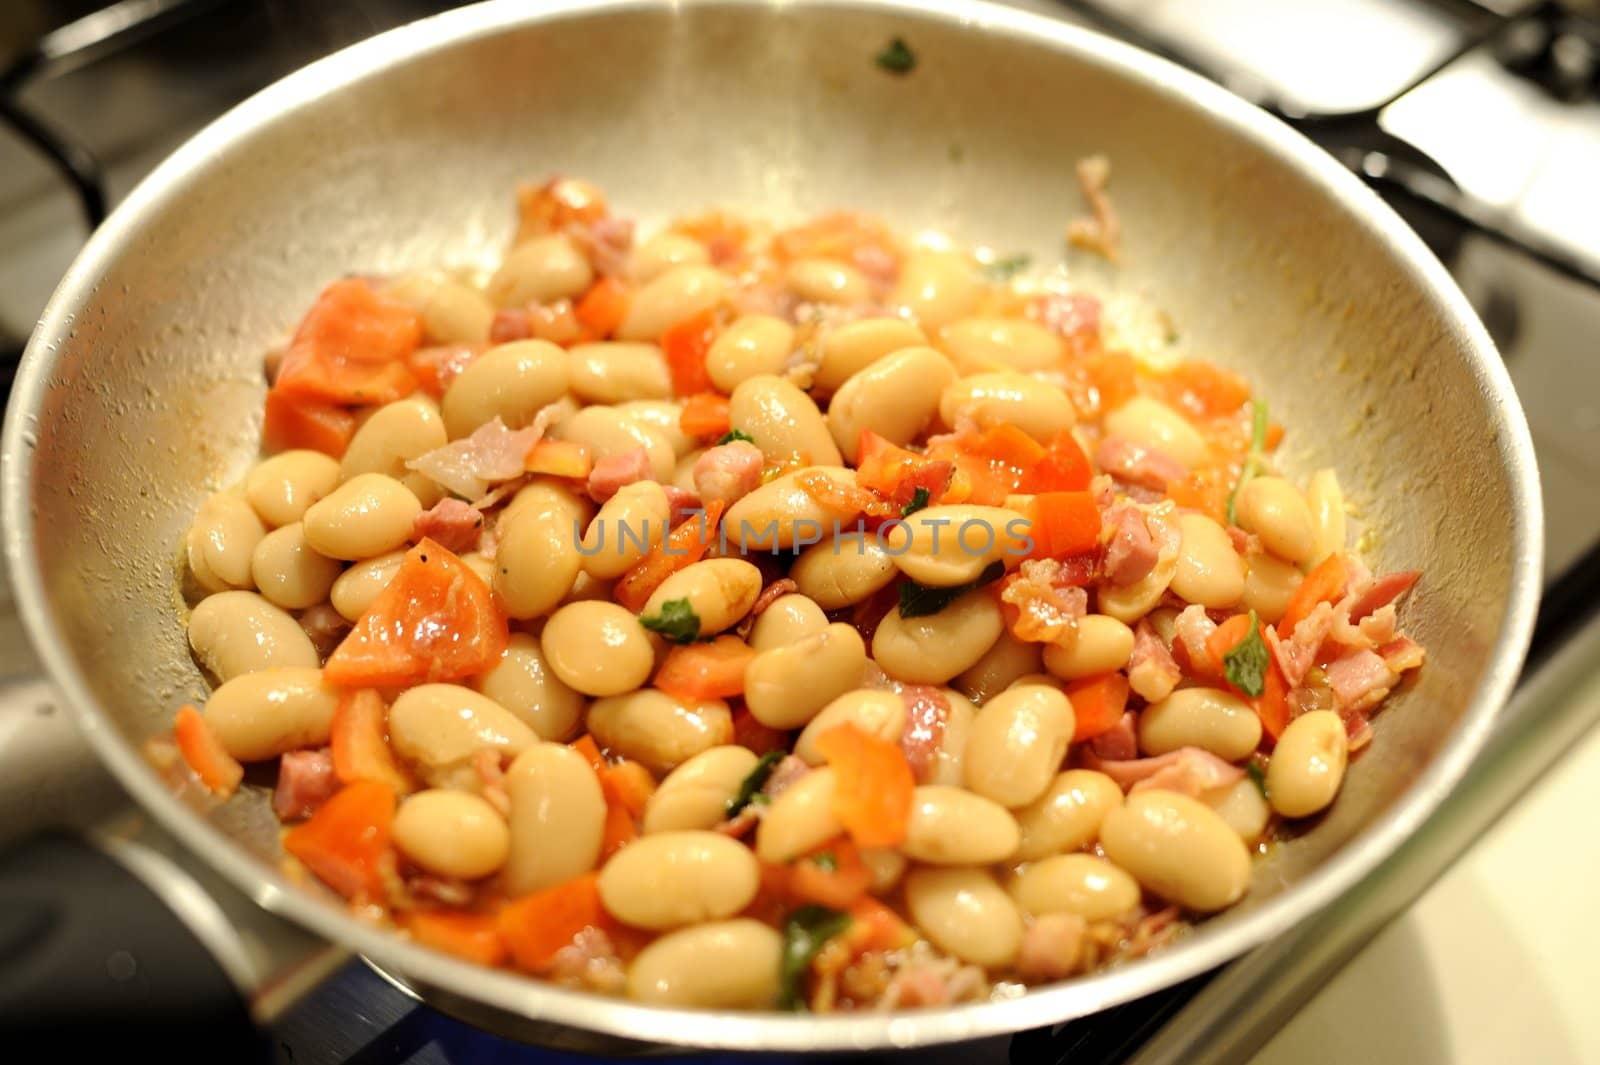 The making of a dish of beans with bacon and tomatos